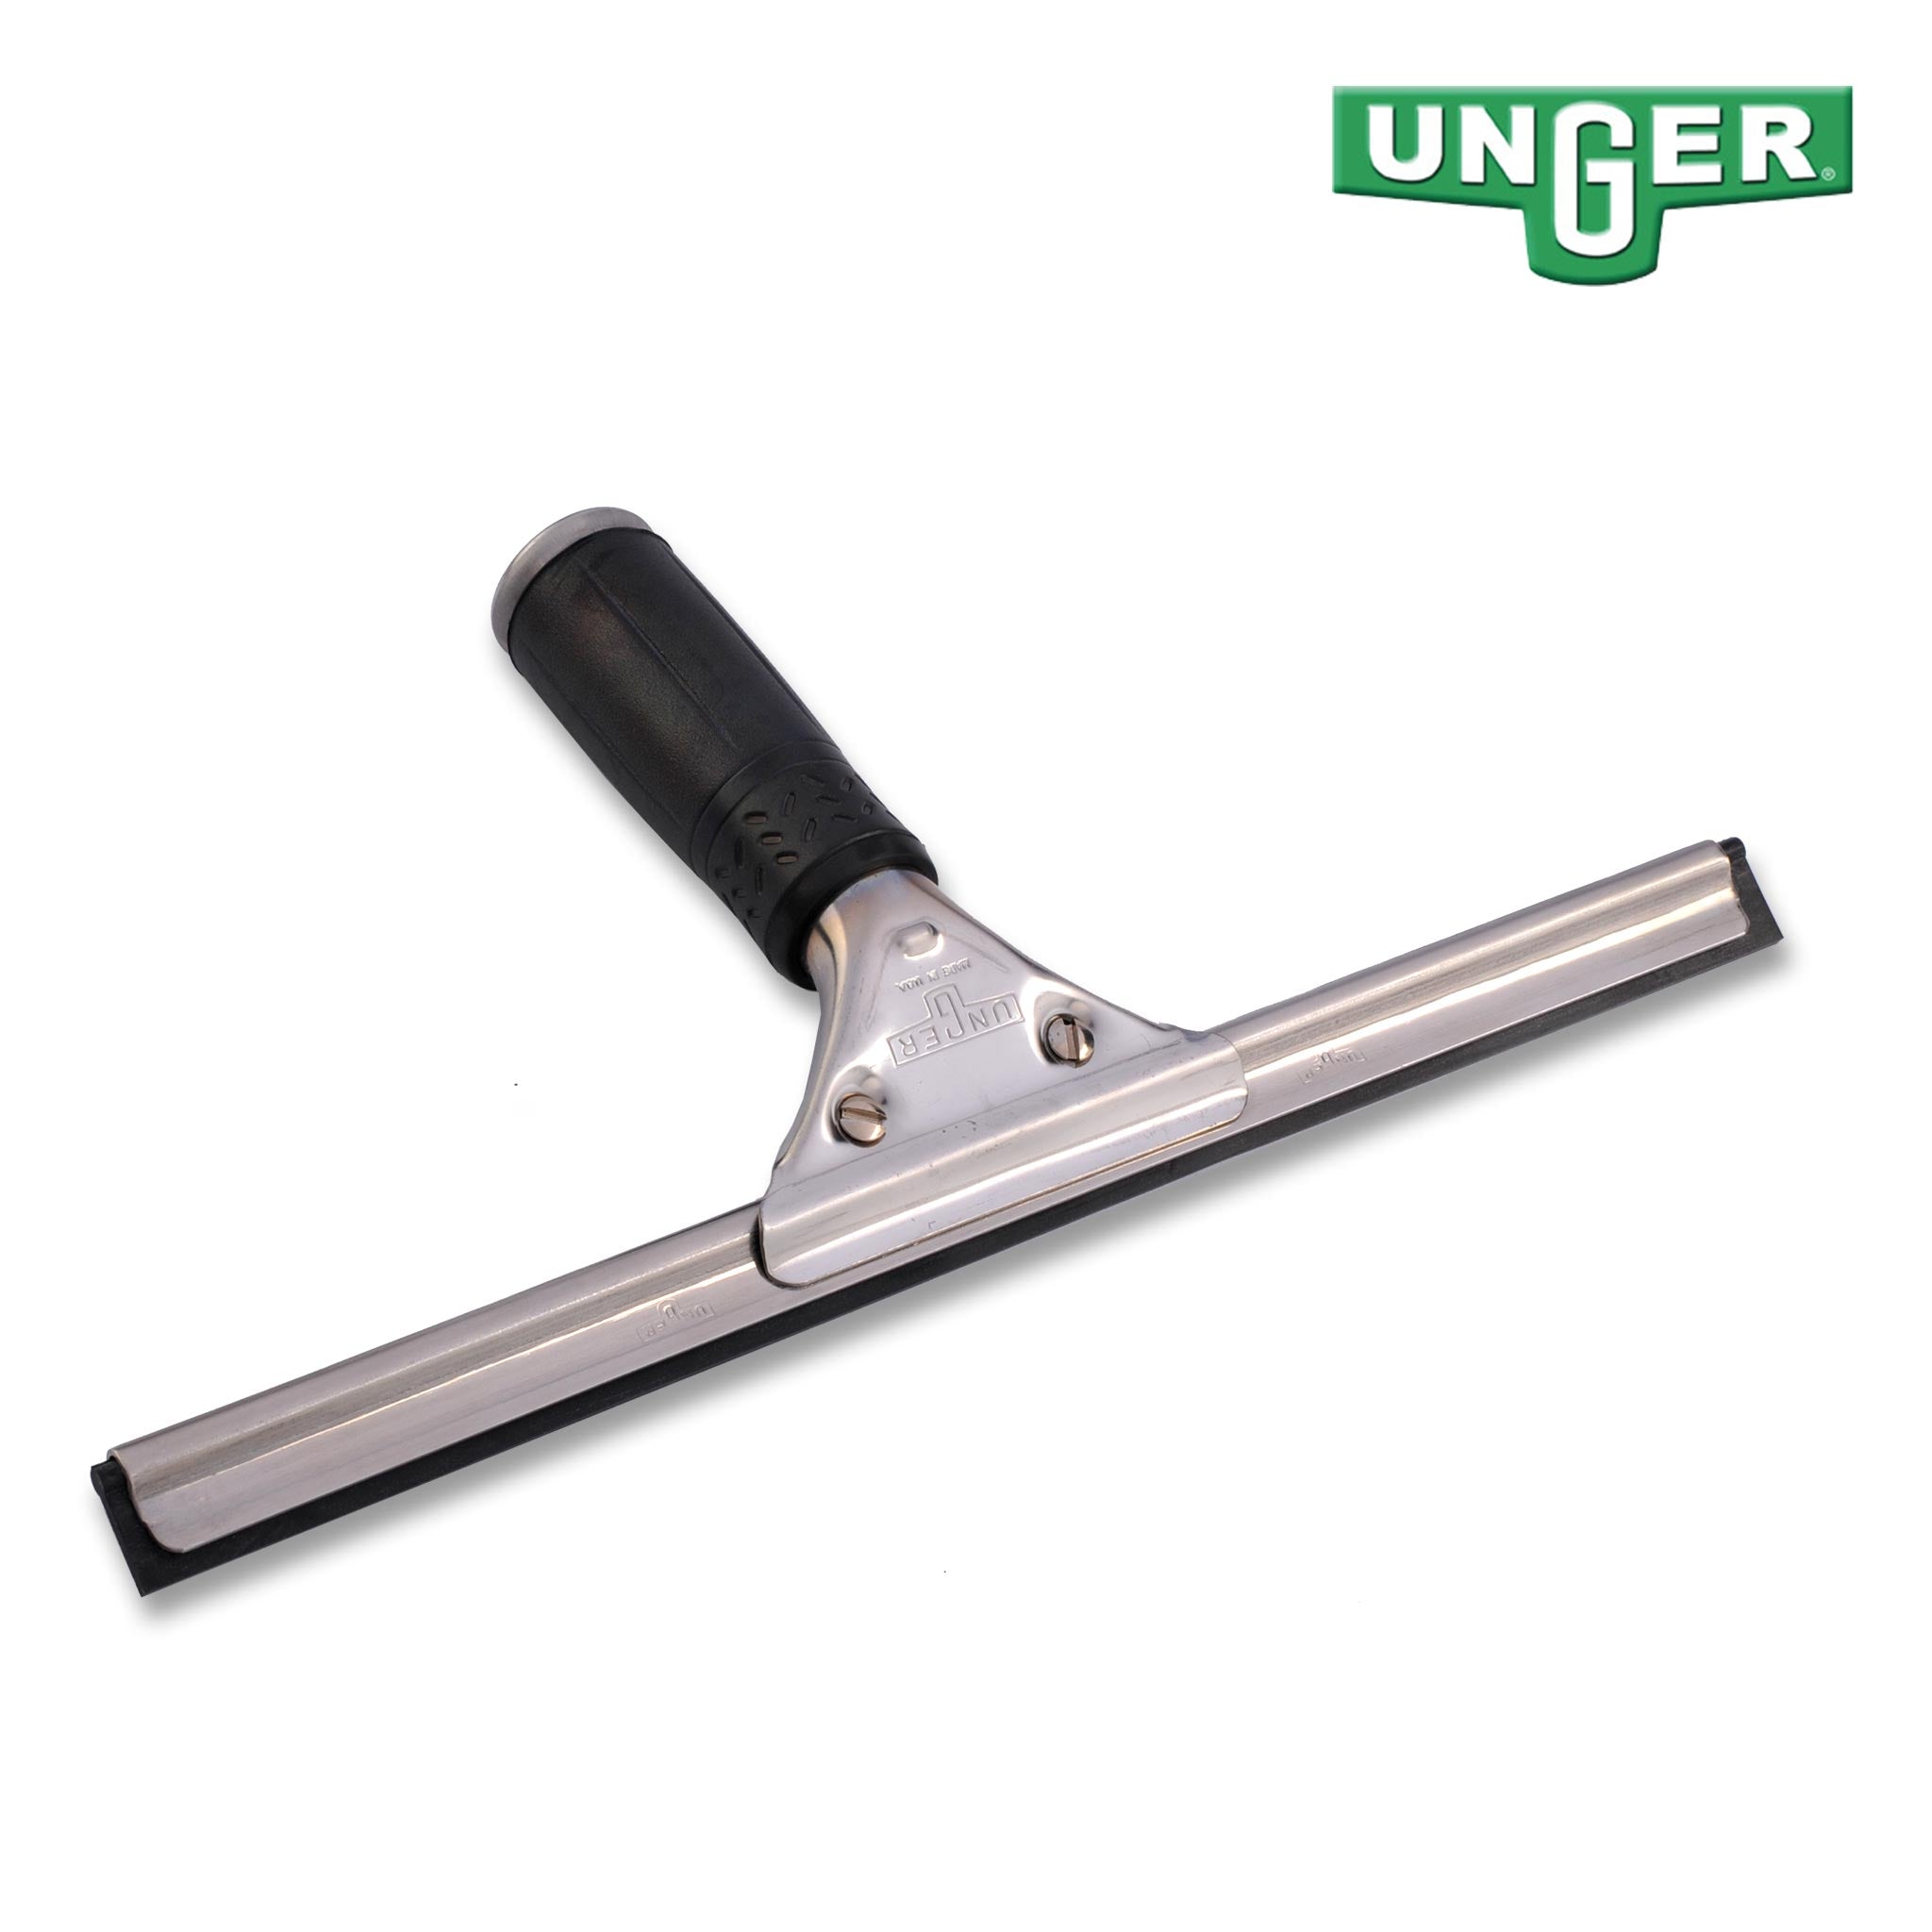 Unger Pro Squeegee - Stainless Steel